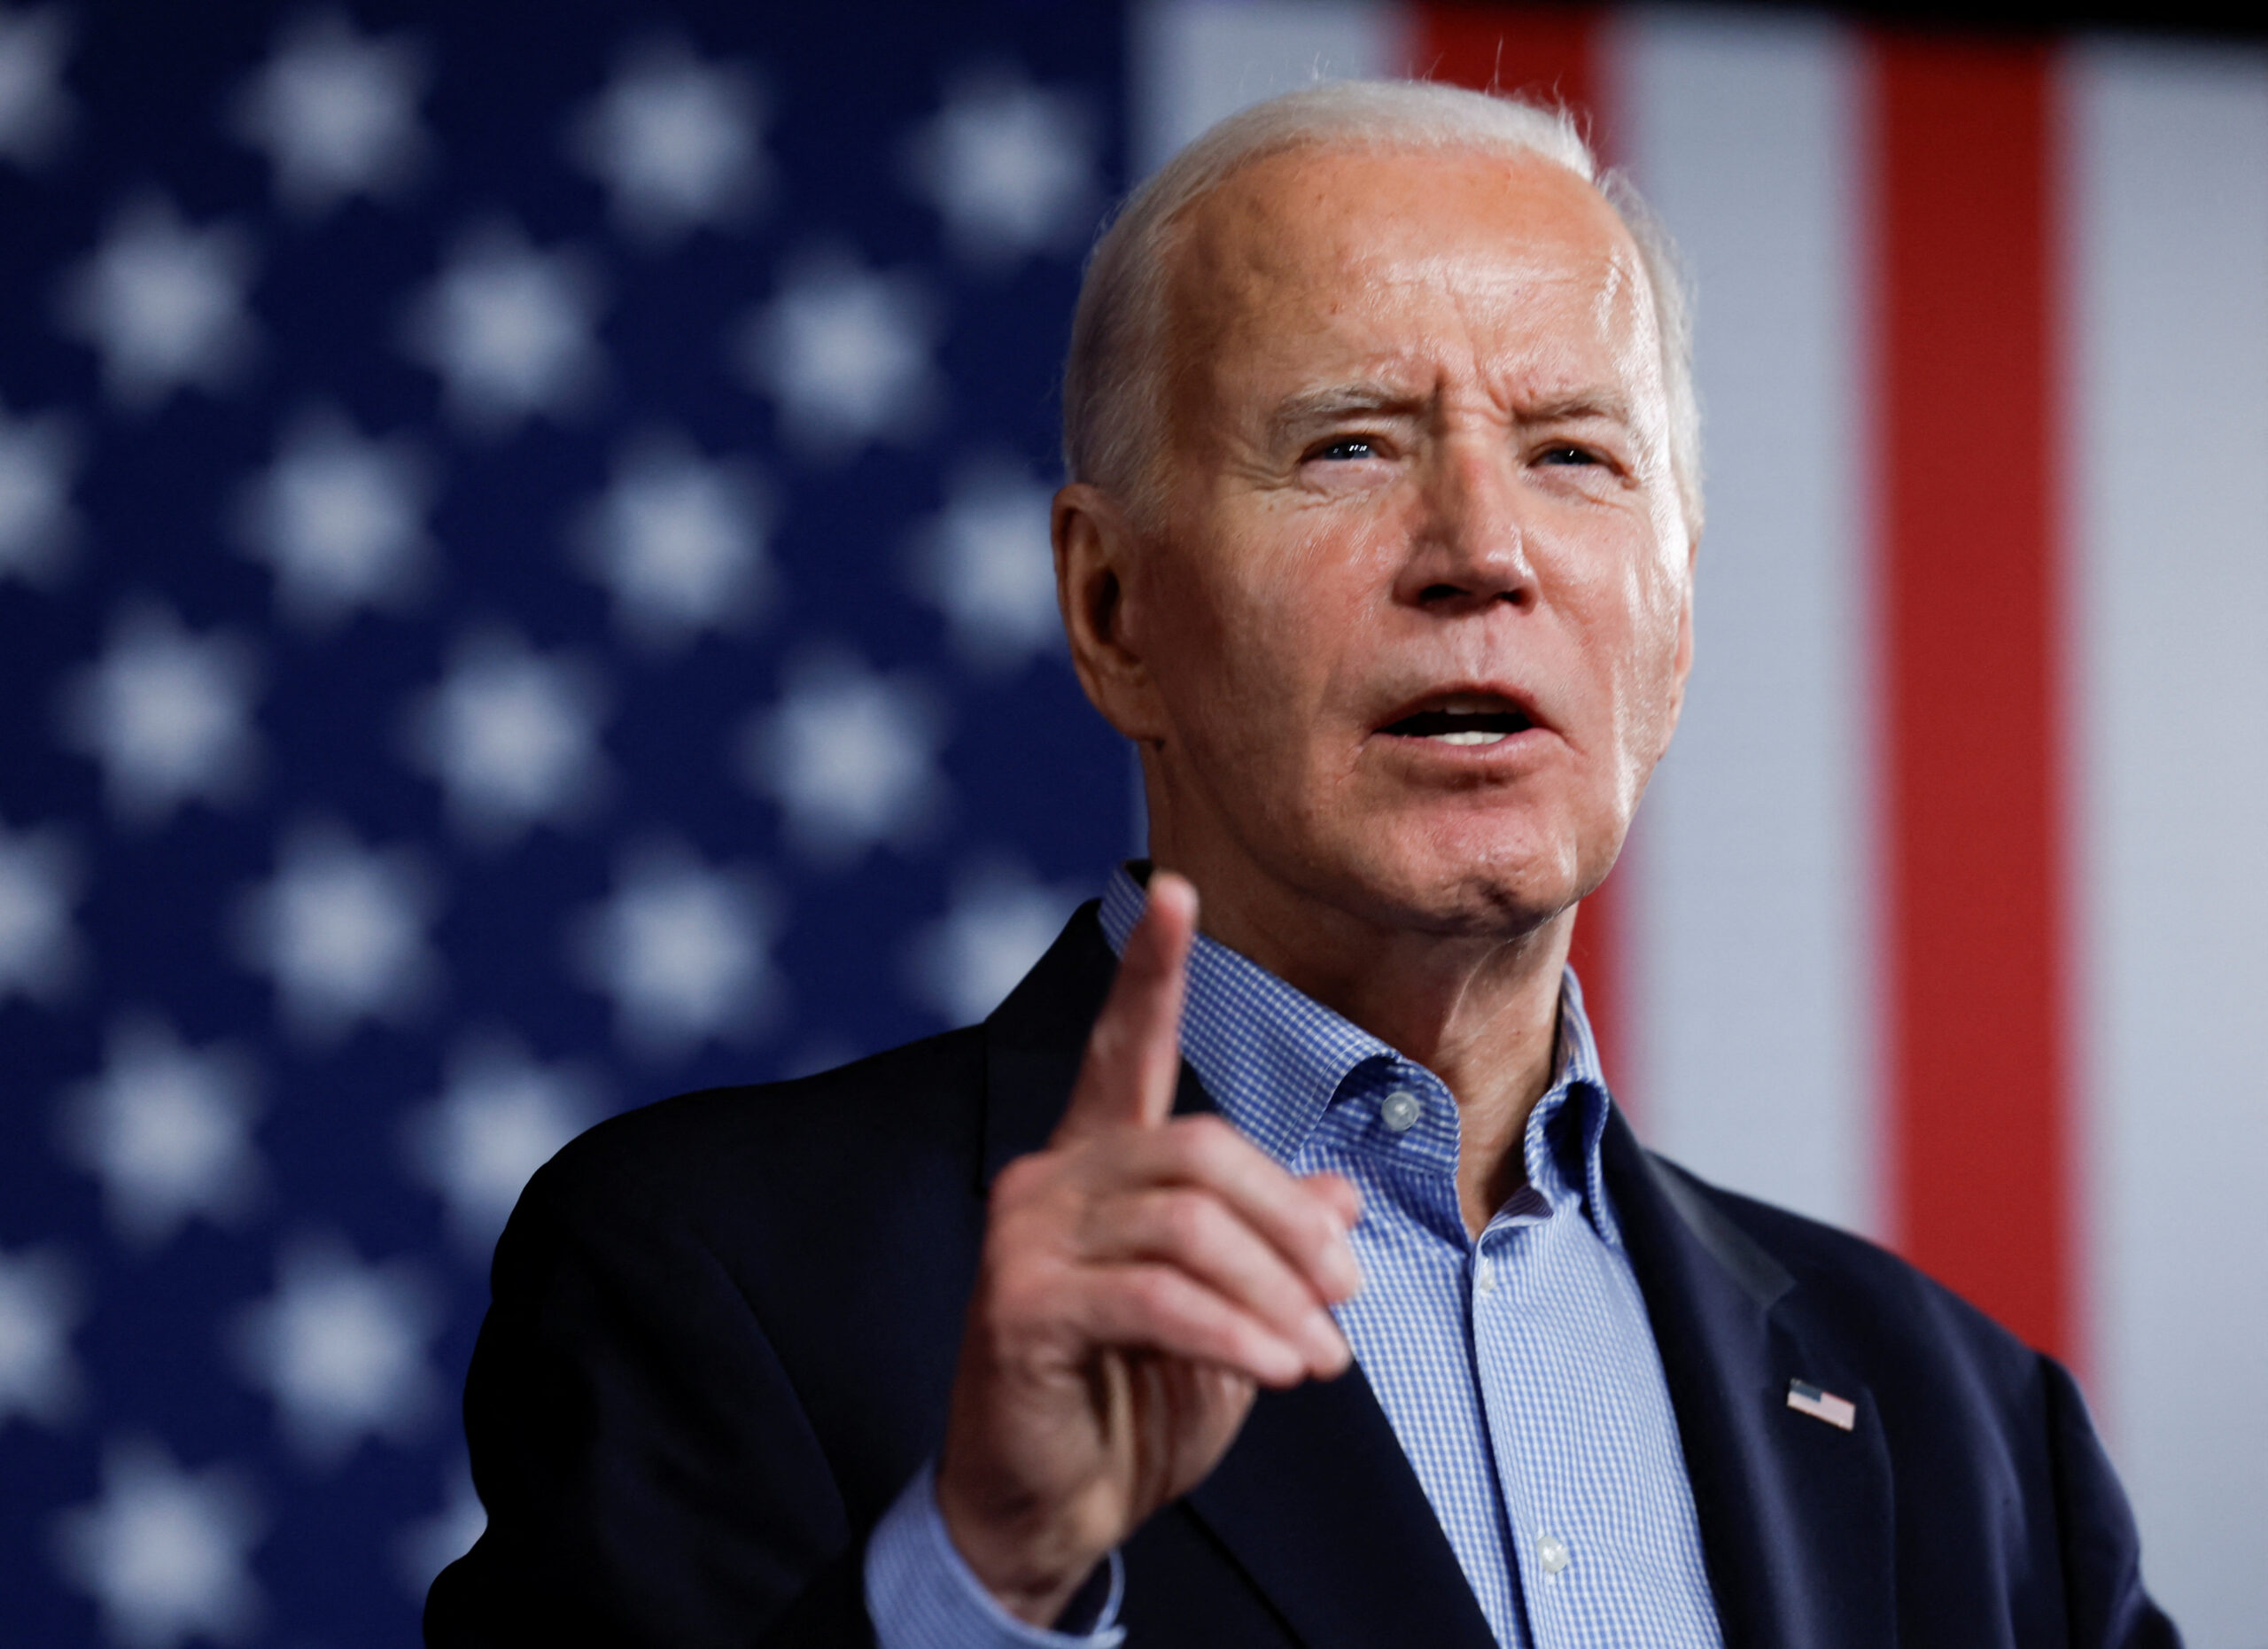 Biden makes contradictory comments on Gaza 'red line' in interview